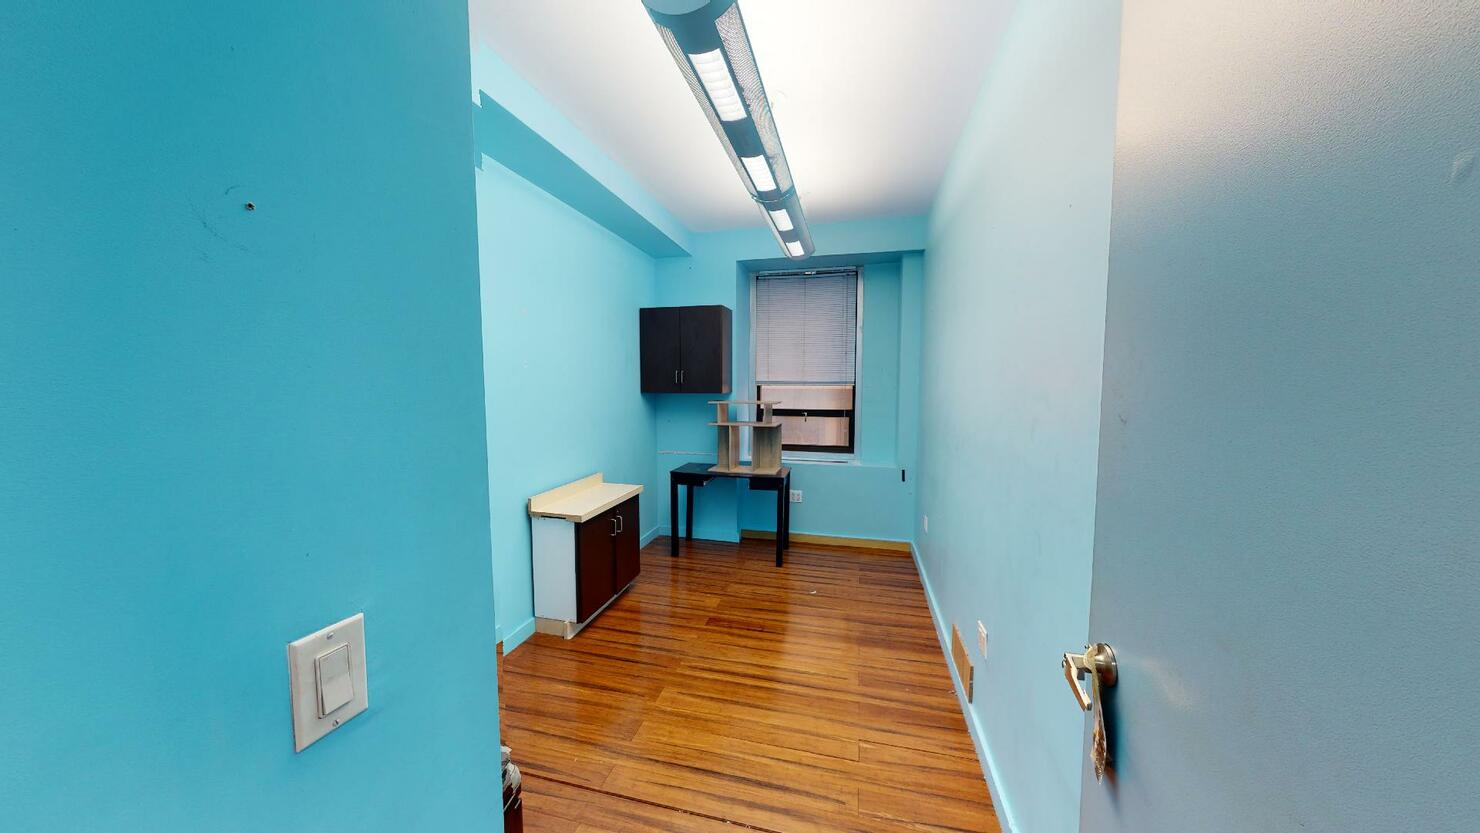 369 Lexington Avenue Office Space, #8B - Office Room with Blue Walls